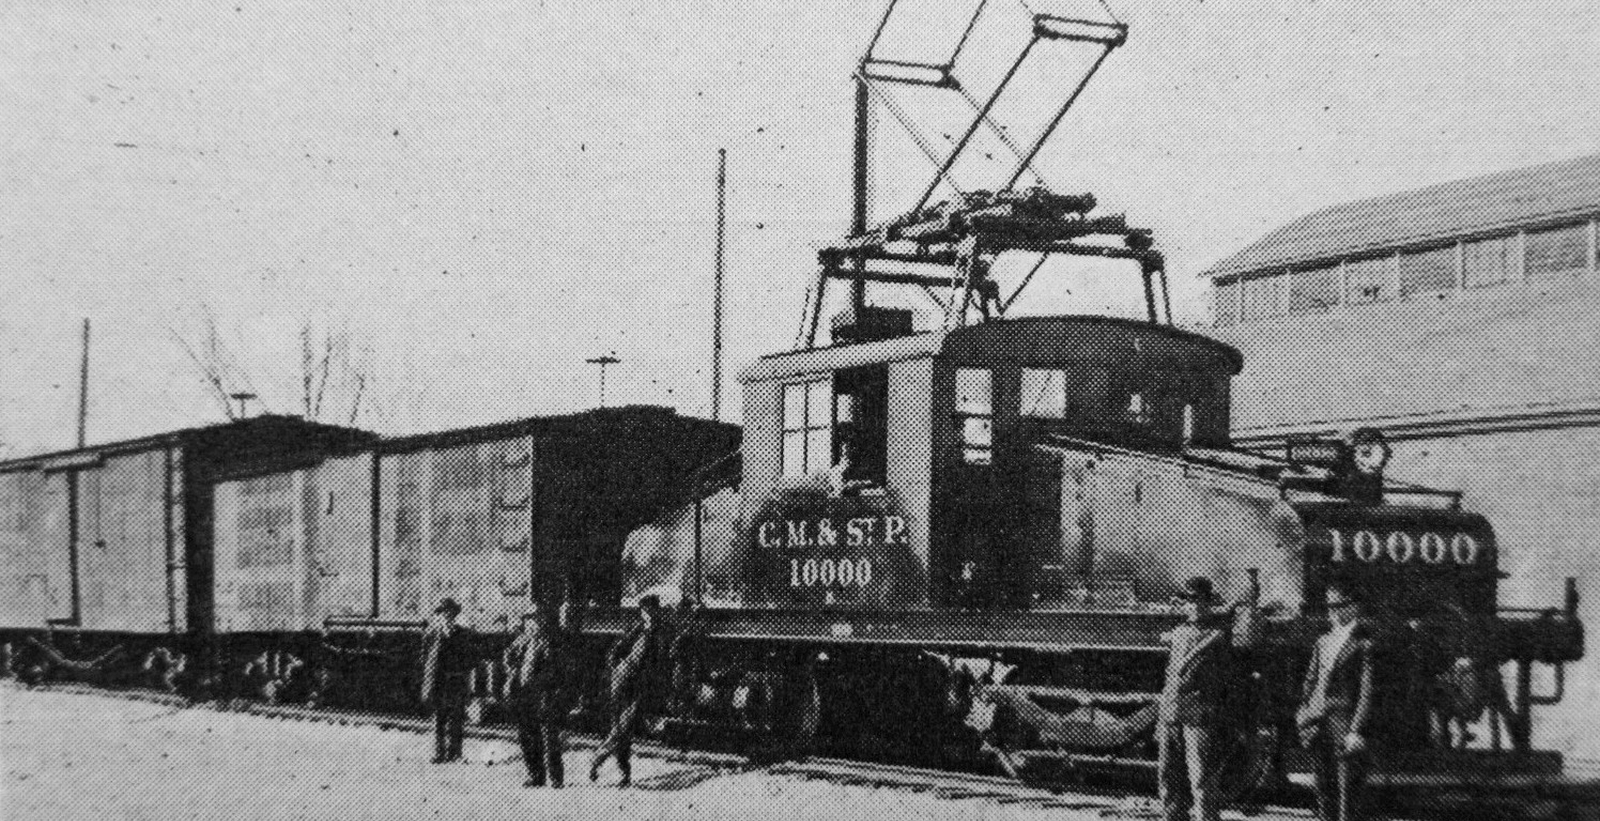 Photo of the machine in the “Electric Railway Journal”